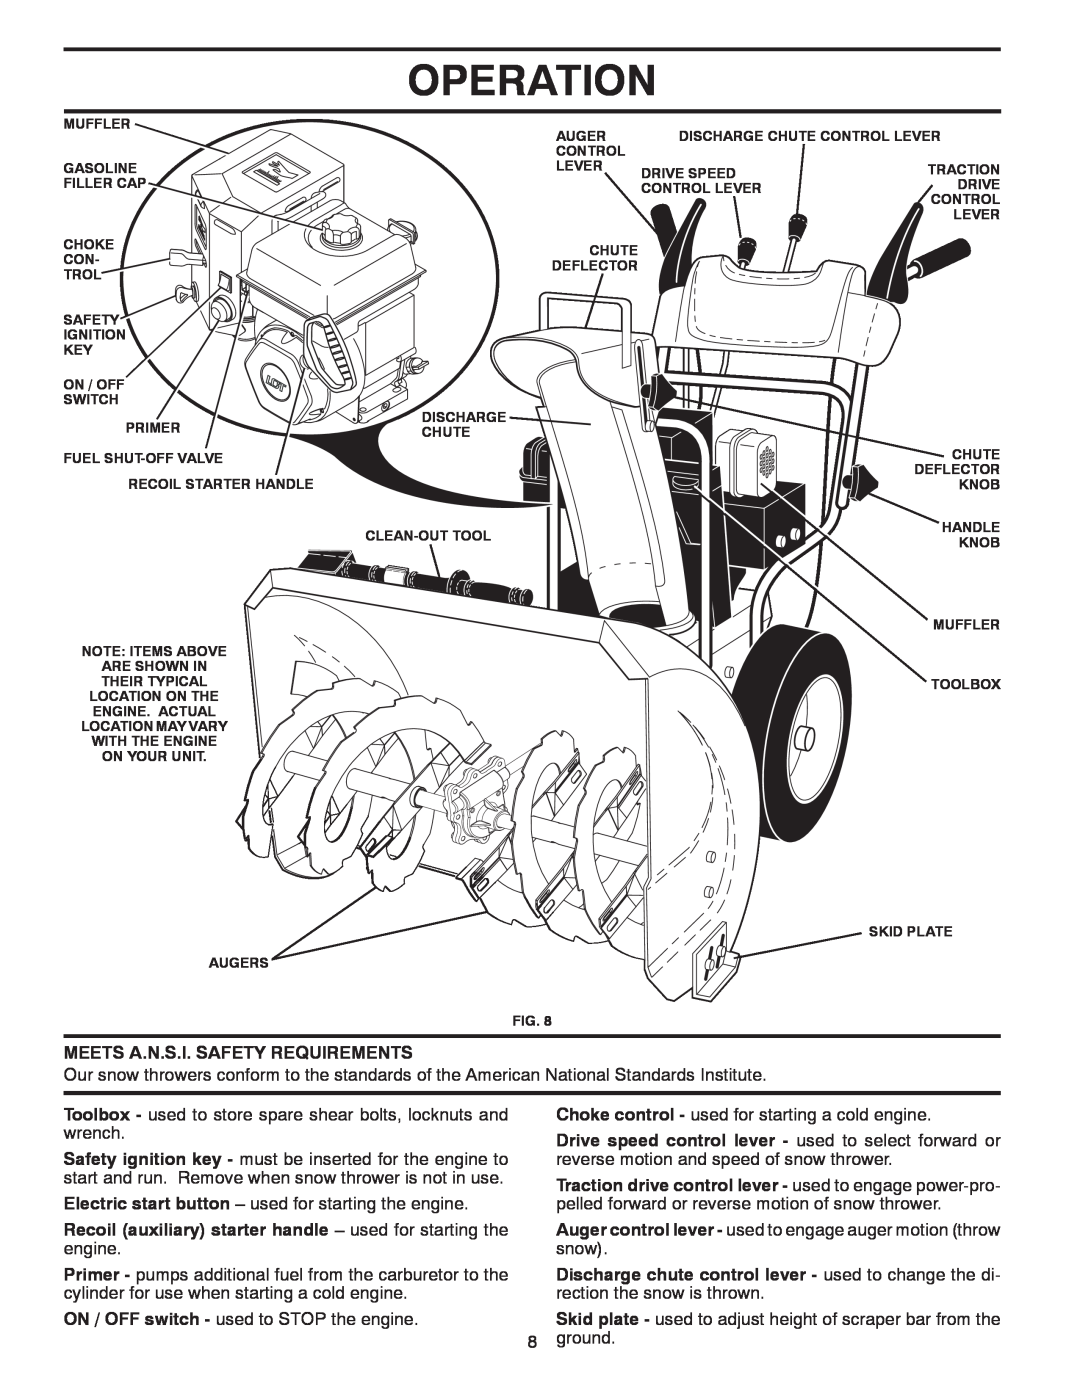 Poulan 430442 owner manual Operation, Meets A.N.S.I. Safety Requirements, ON / OFF switch - used to STOP the engine, ground 